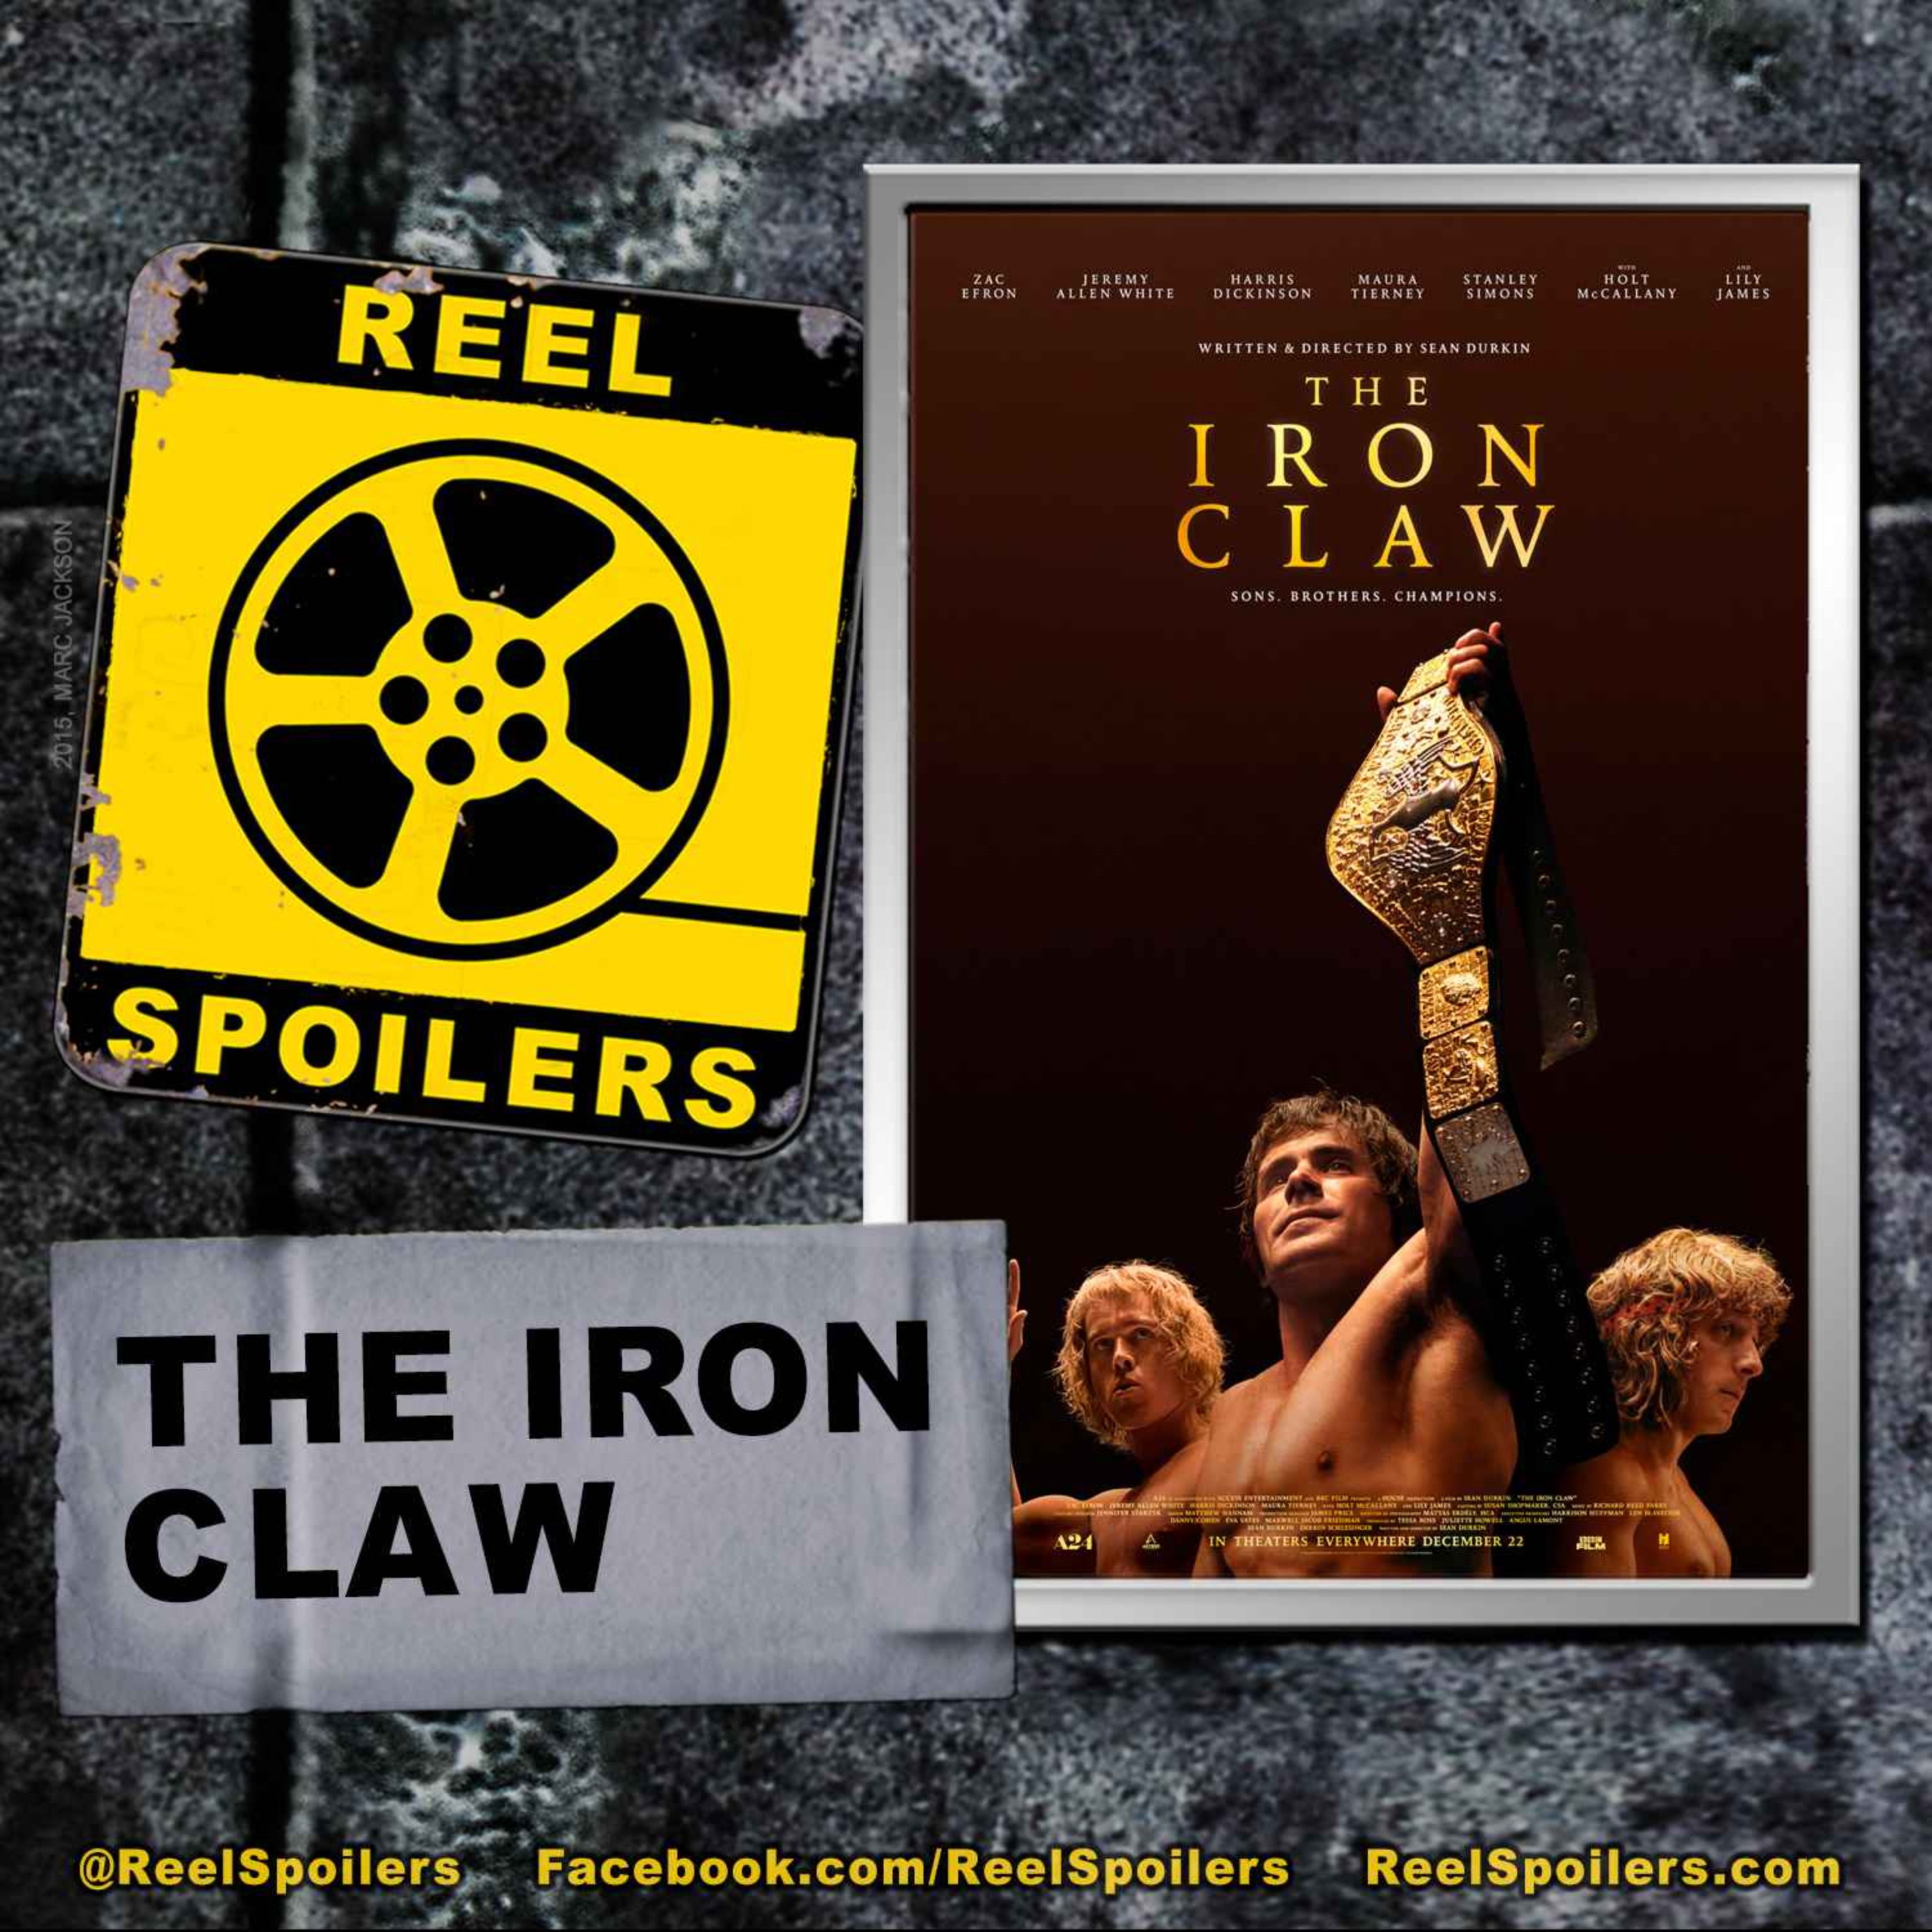 THE IRON CLAW Starring Zac Efron, Jeremy Allen White, Maura Tierney, Holt McCallany